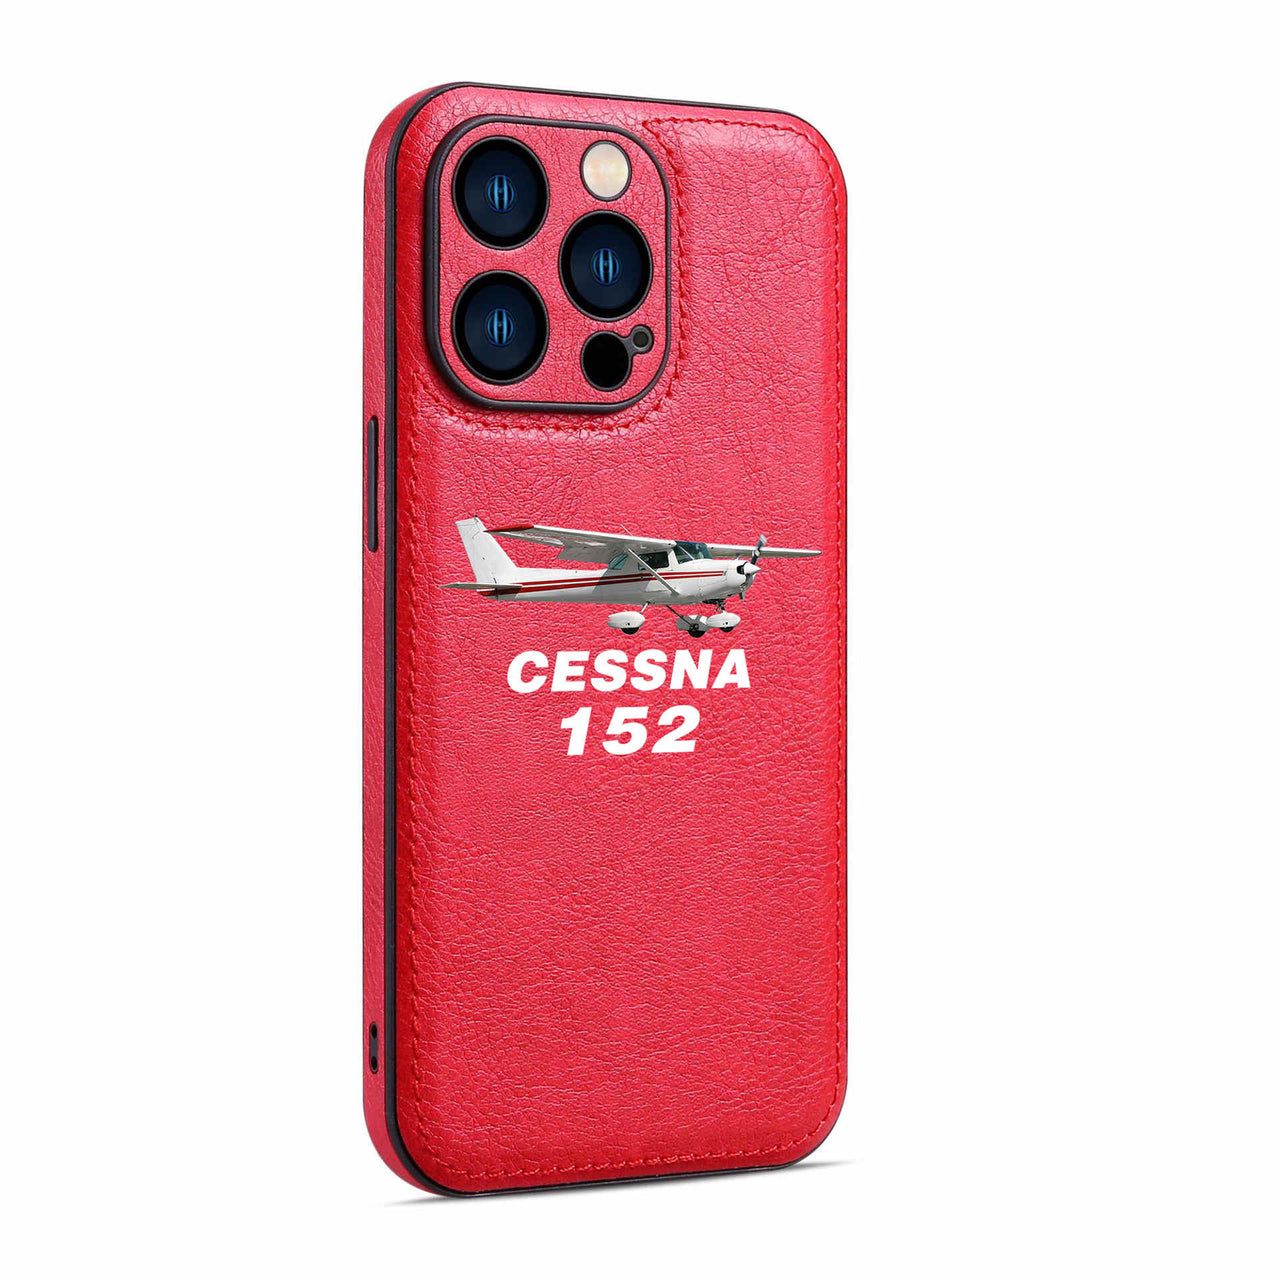 The Cessna 152 Designed Leather iPhone Cases